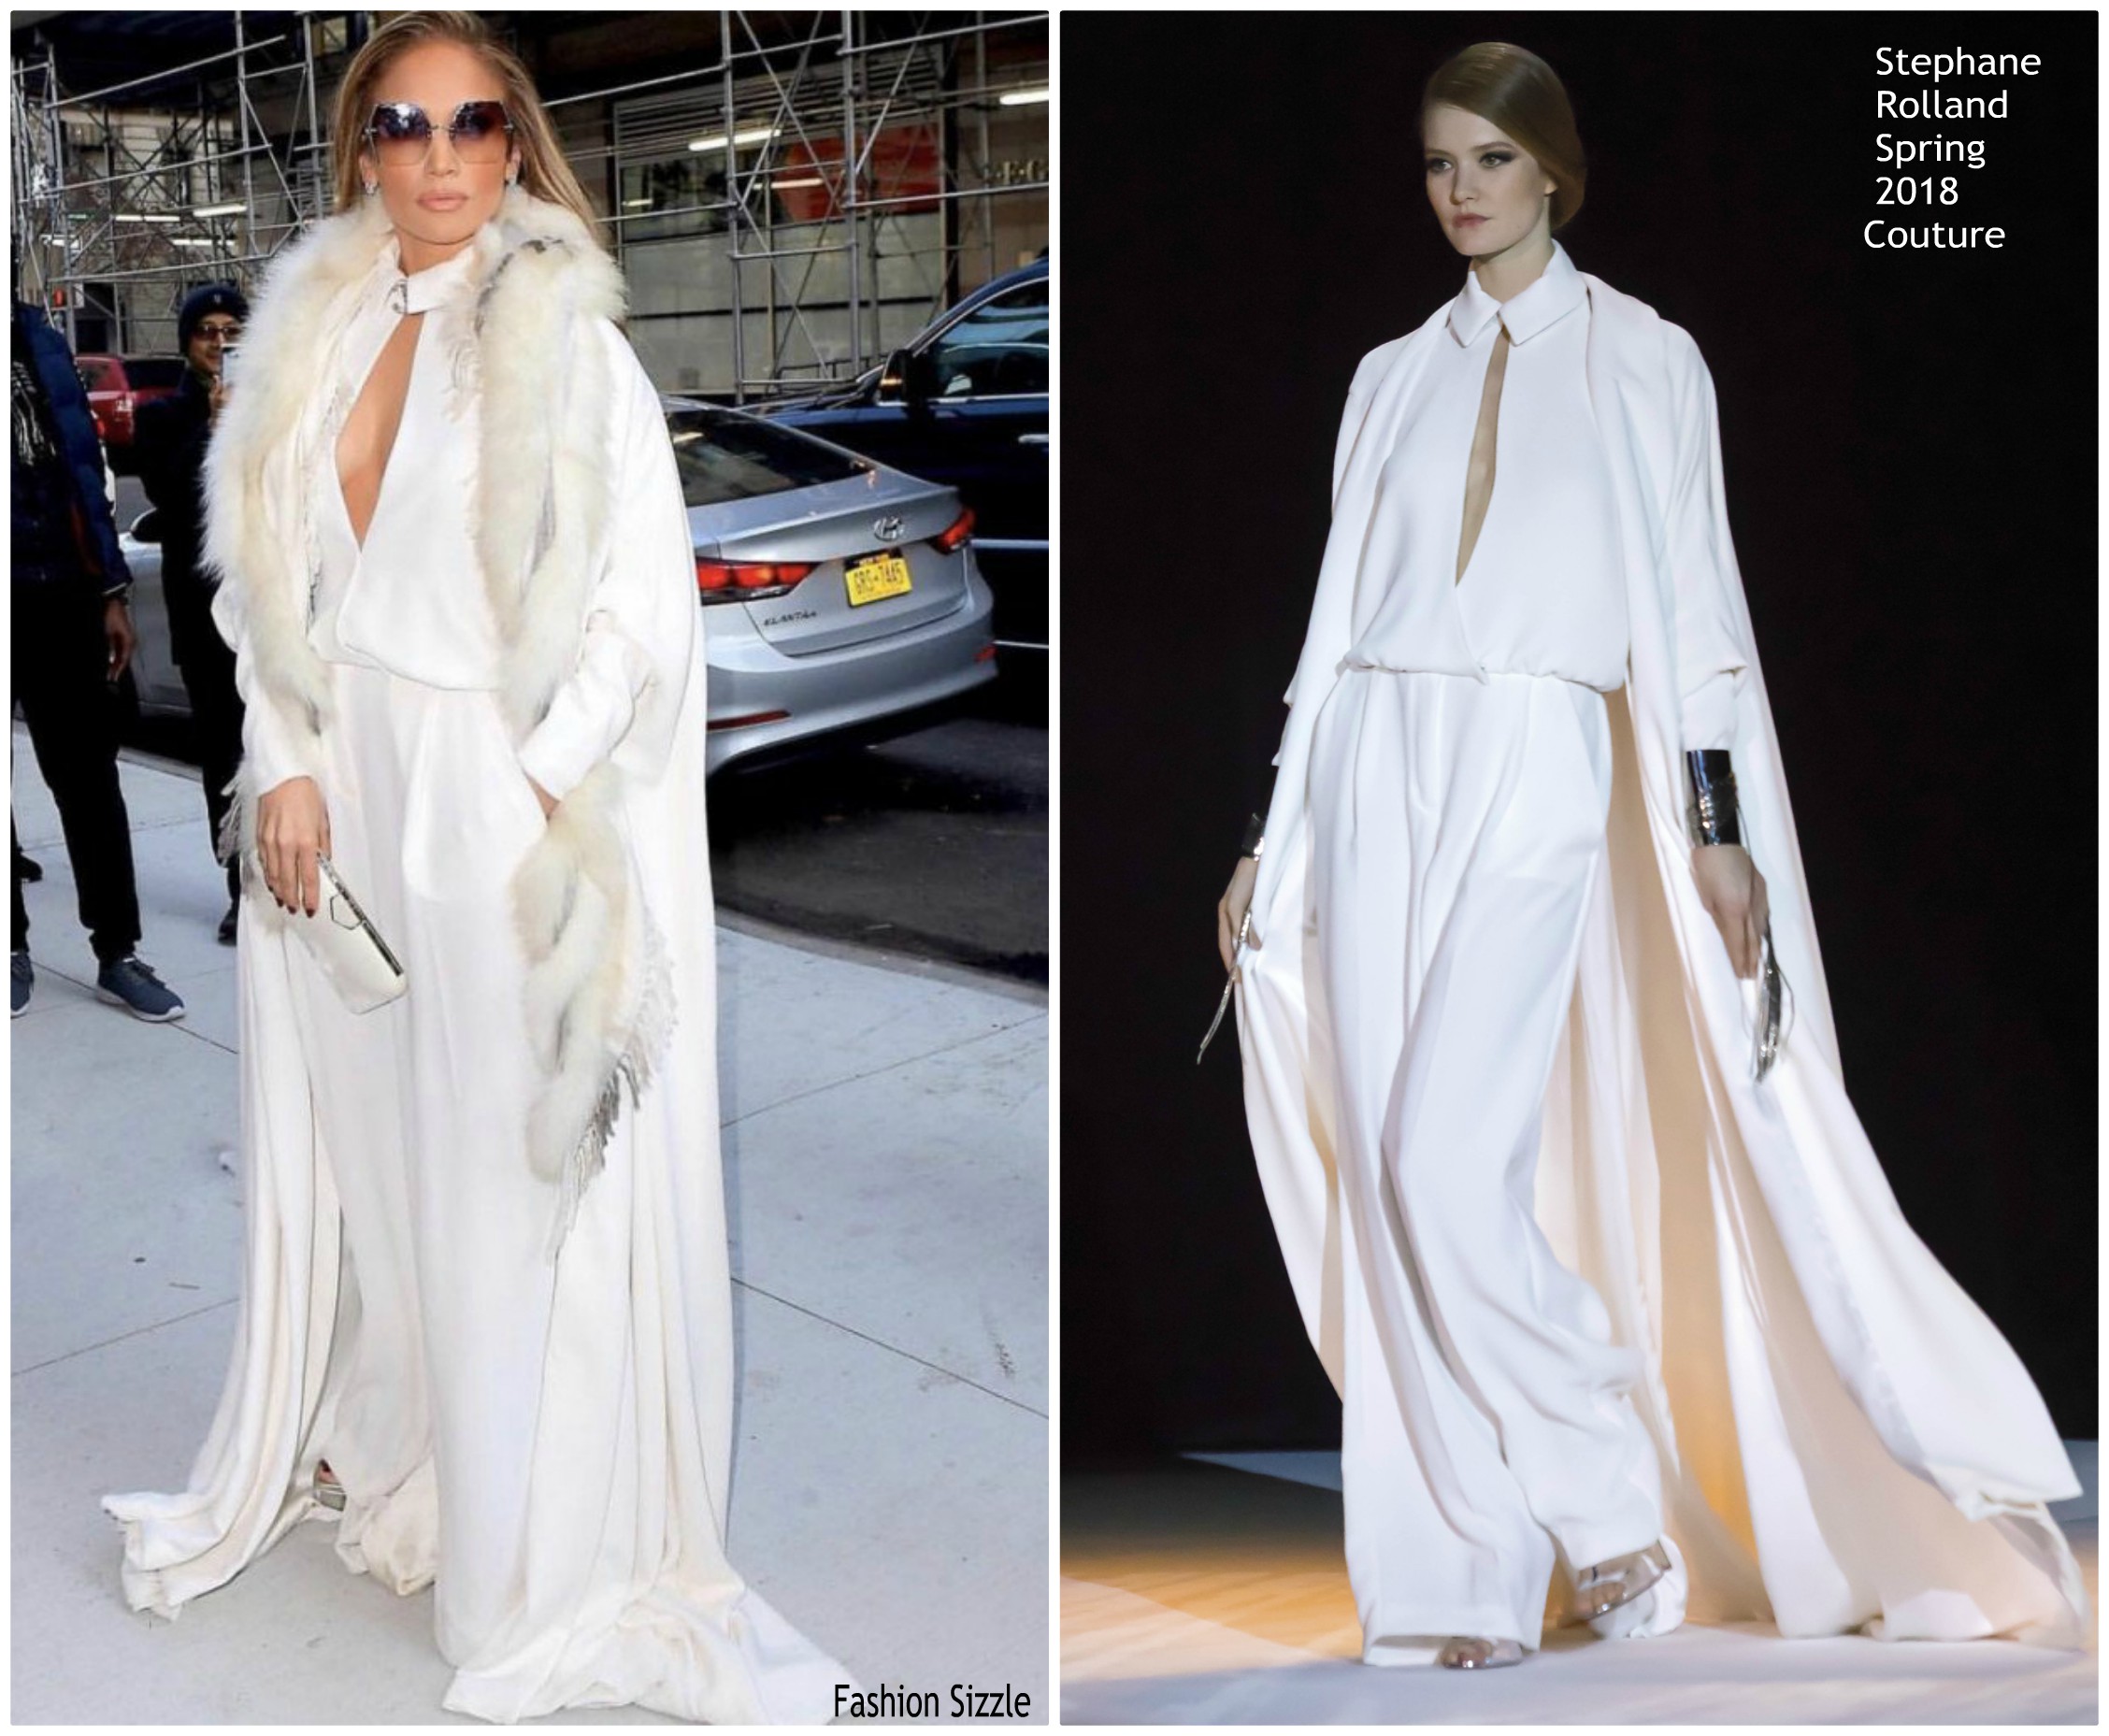 Jennifer Lopez in Stephane Rolland Couture  @ Watch What Happens Live